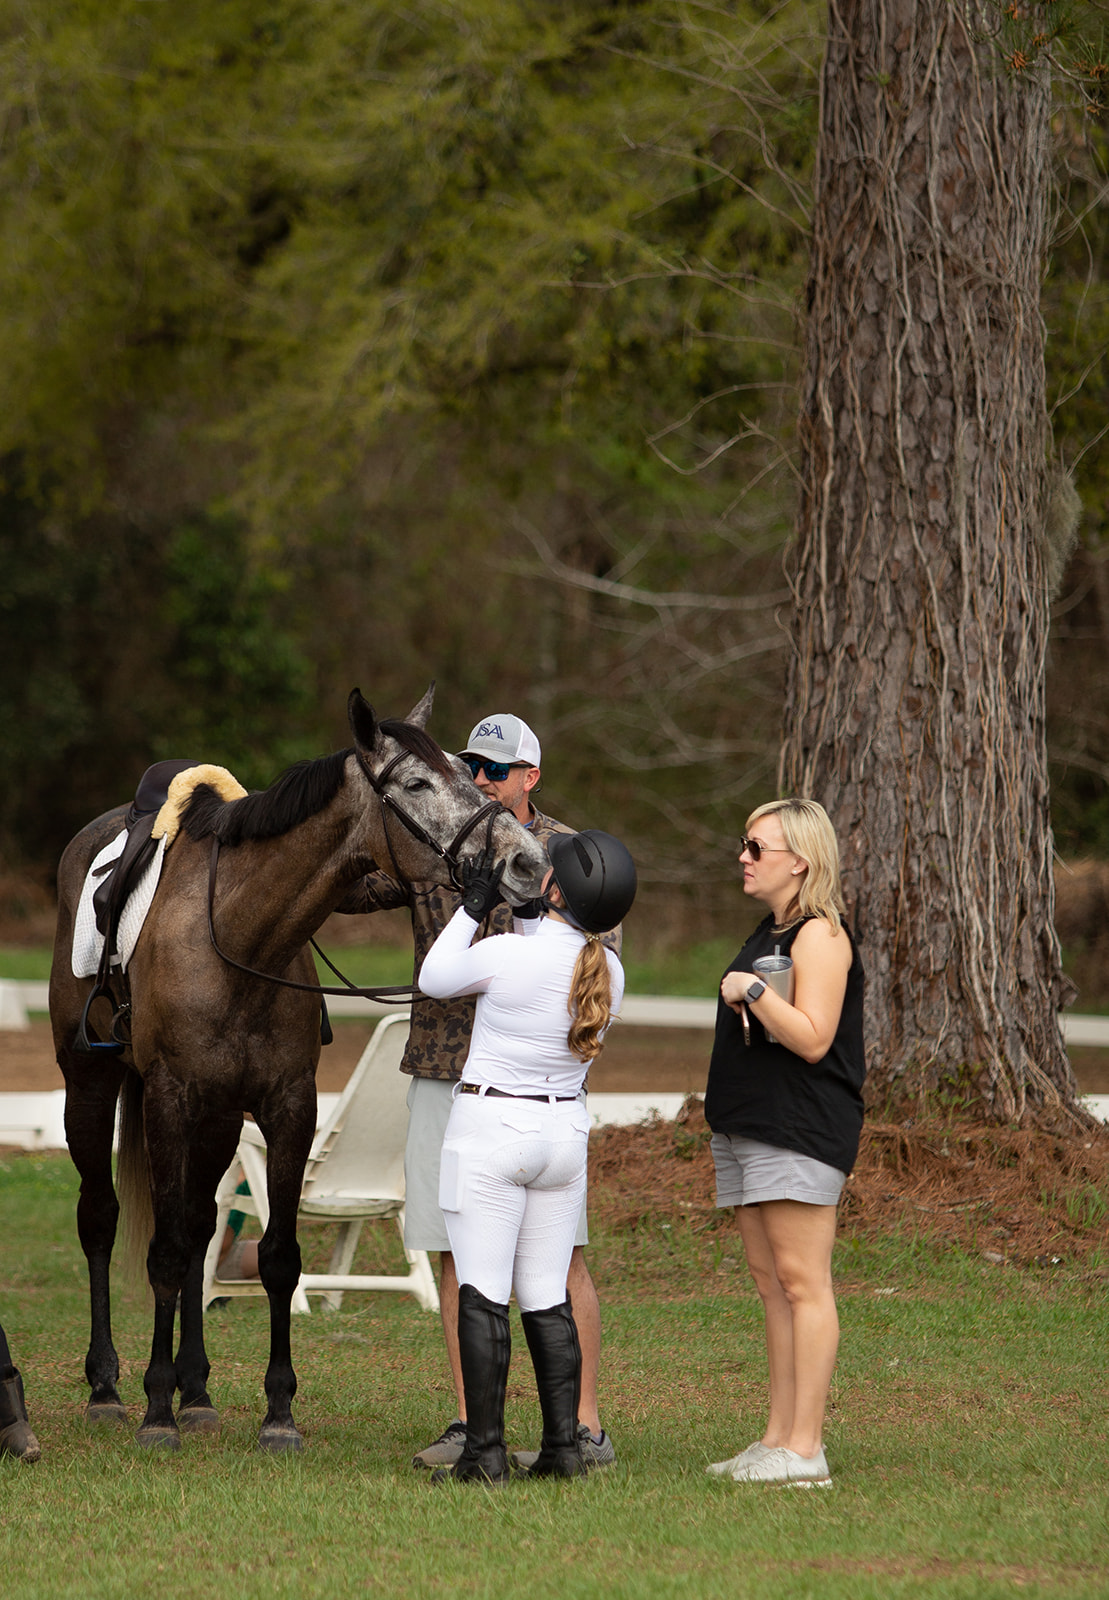 Behind the Scenes from Eventing competition in Tallahassee, FL at Mahan Farm. calicoandchrome.com